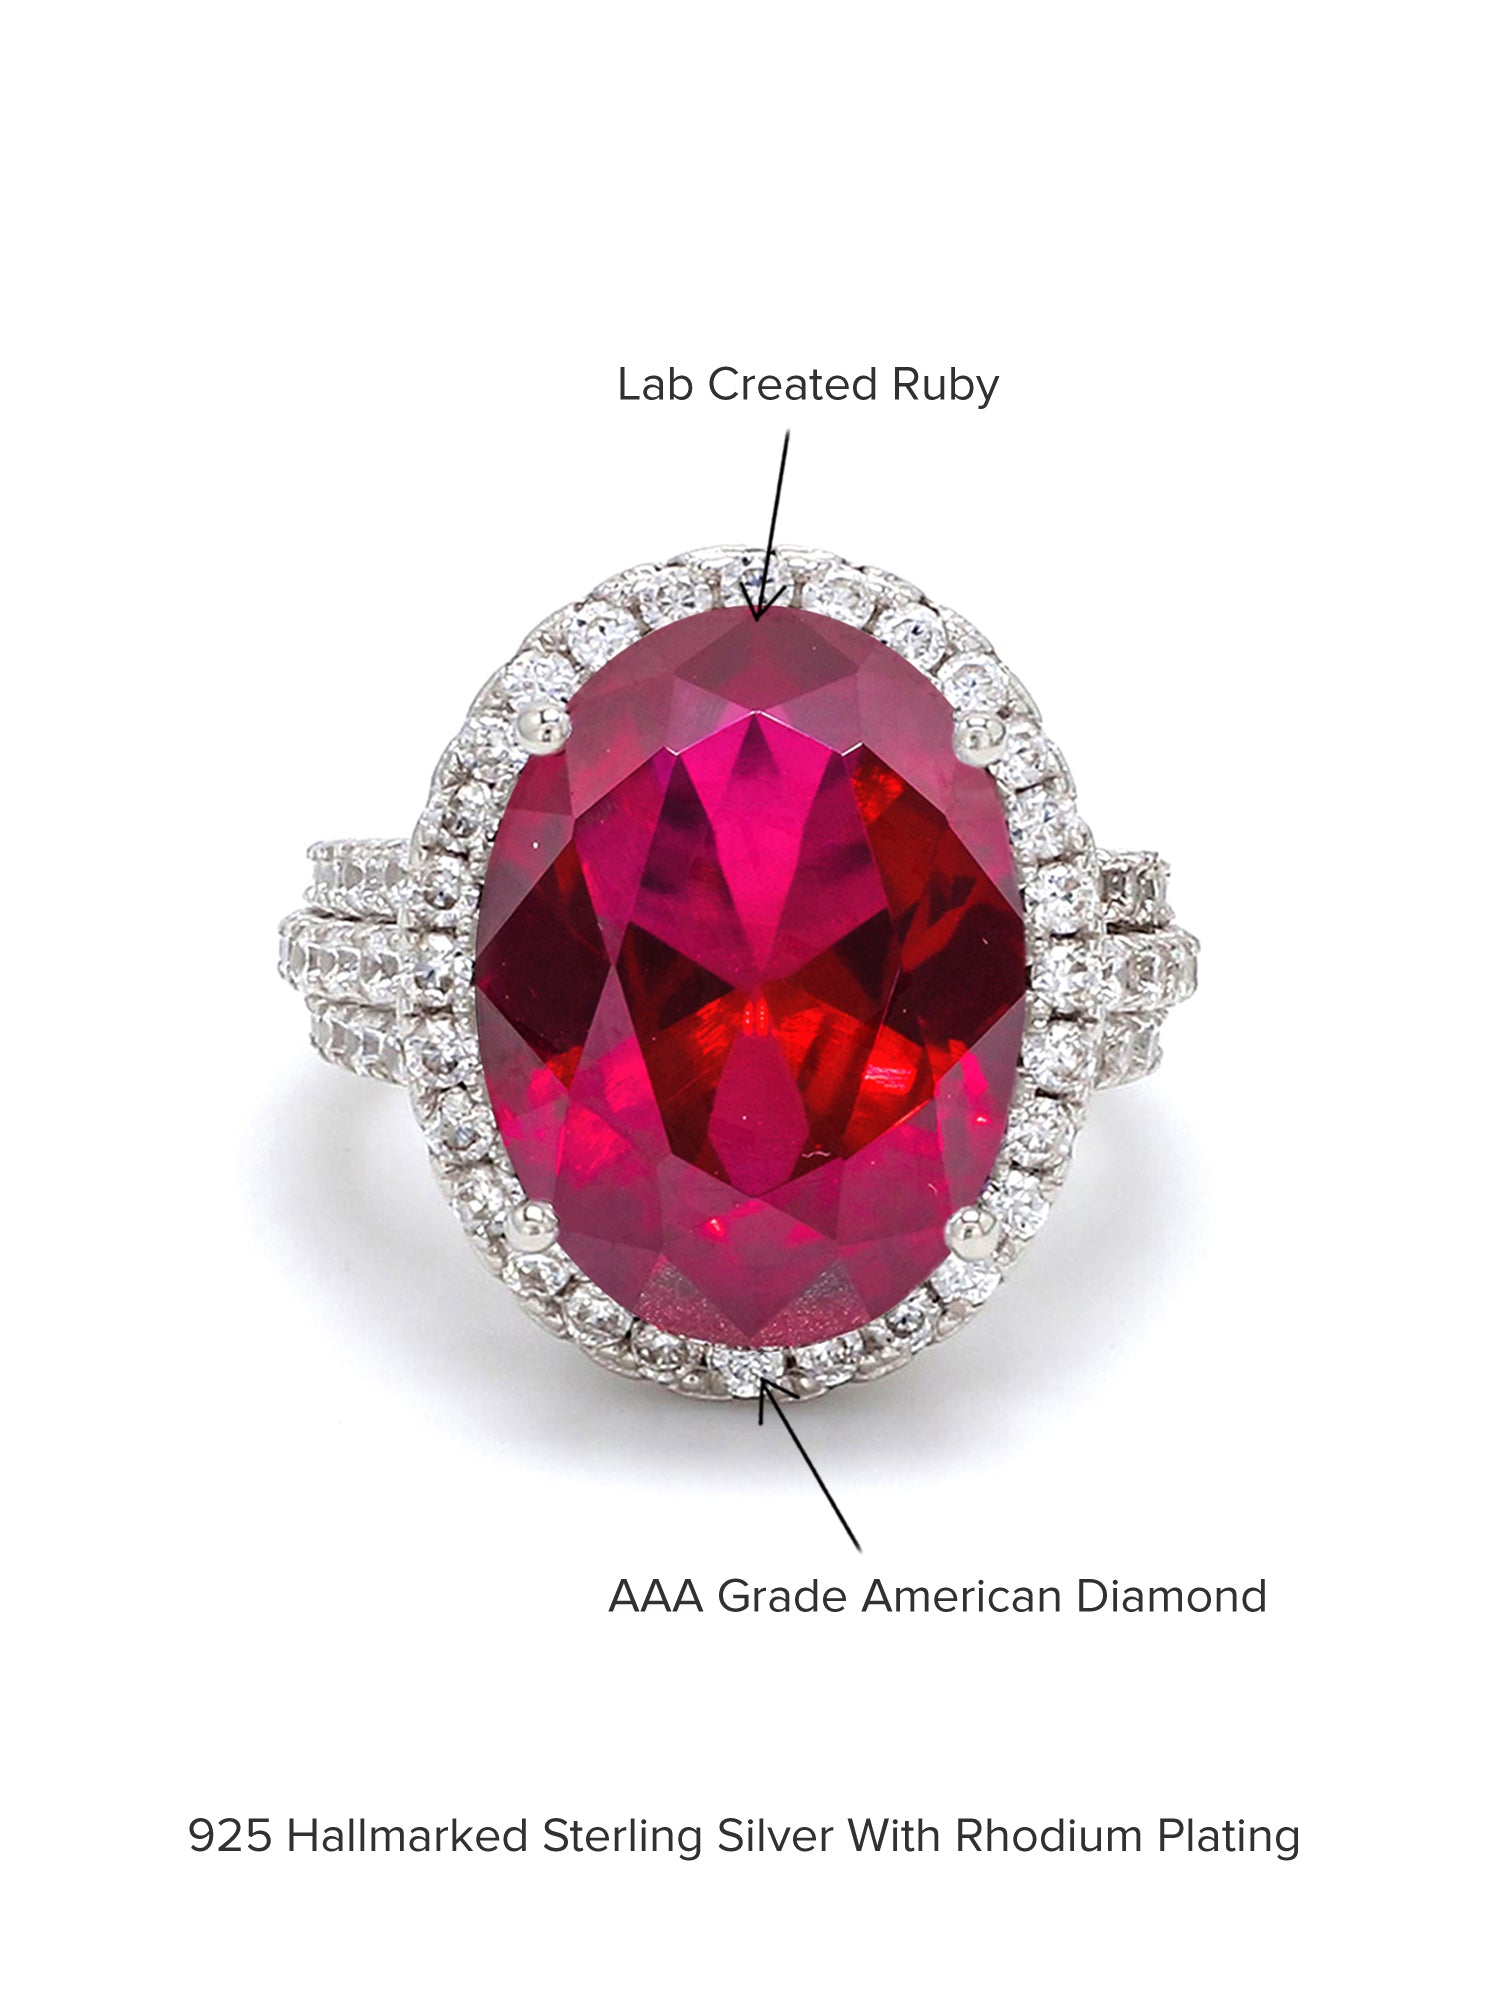 GLAMM RUBY OVAL RING IN 925 SILVER-4